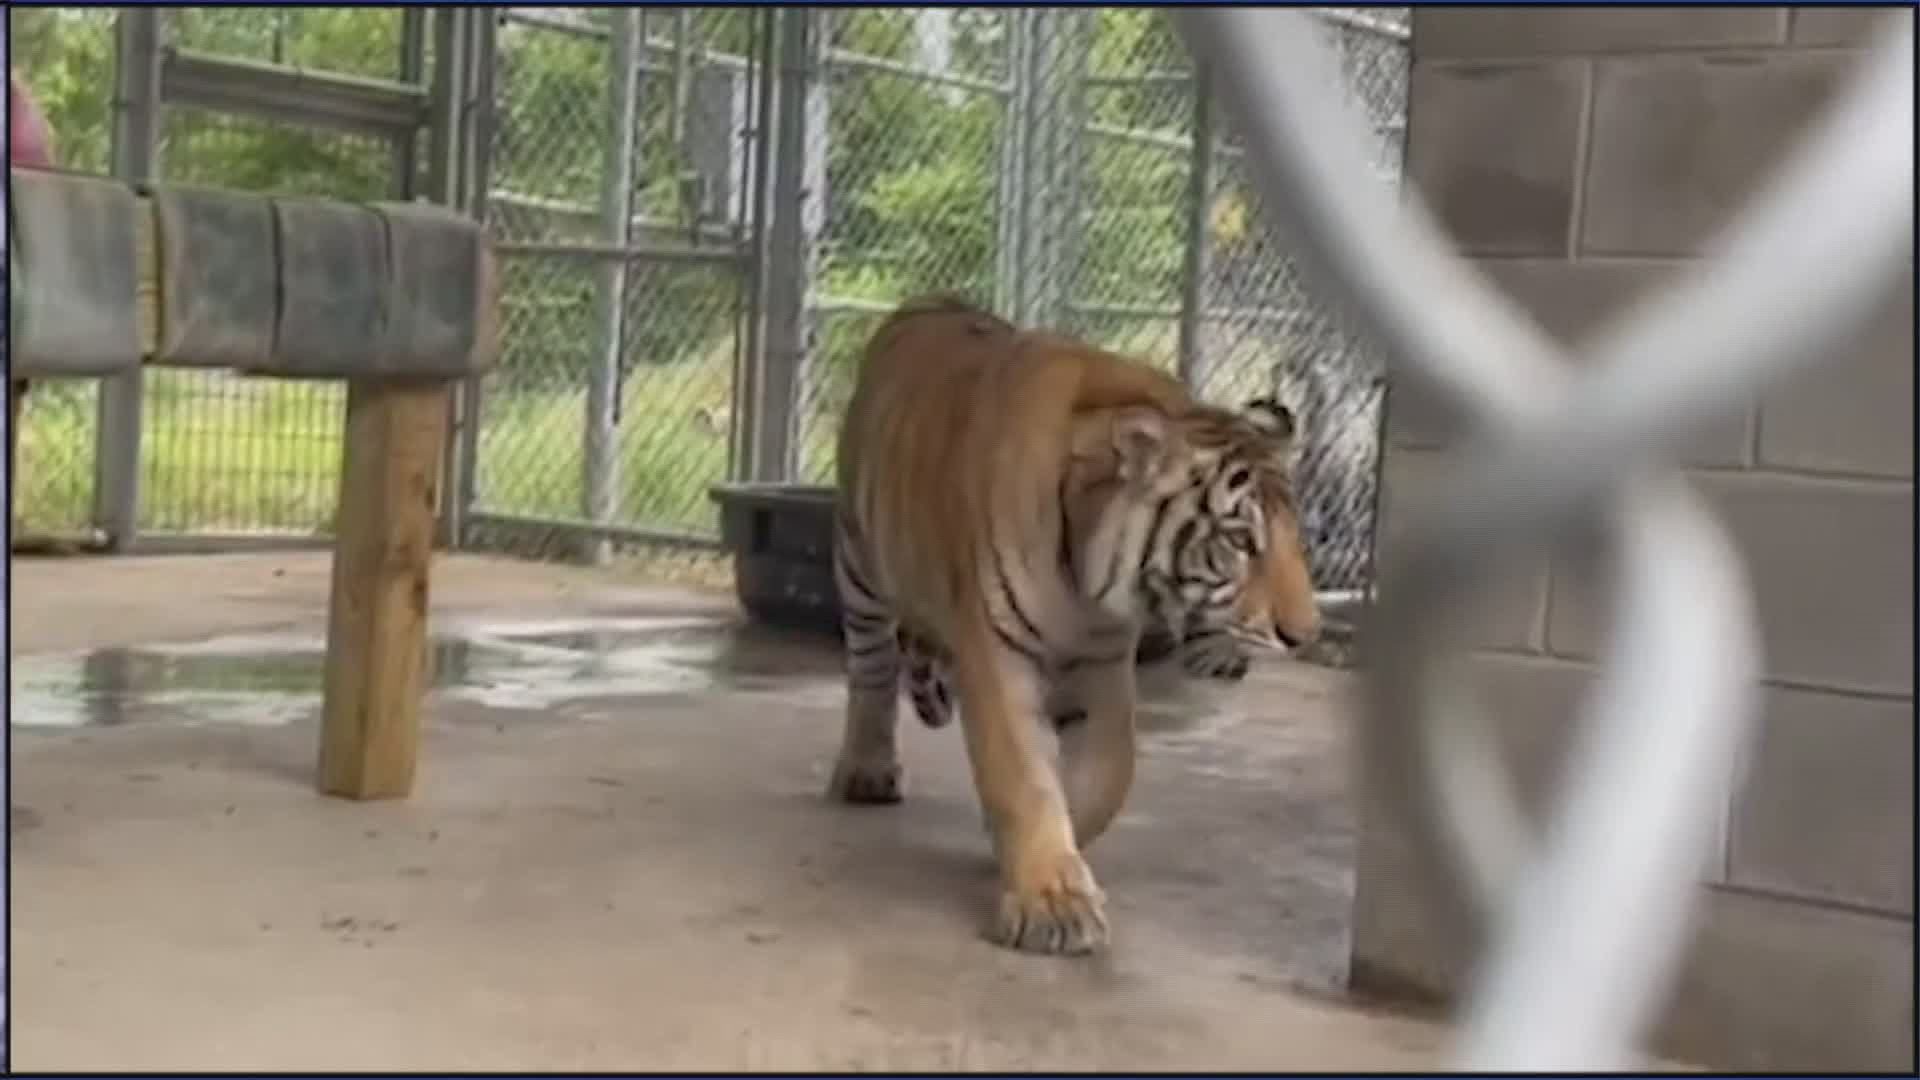 Animals rights advocates are pushing for new legislation to ban owning big cats as pets.